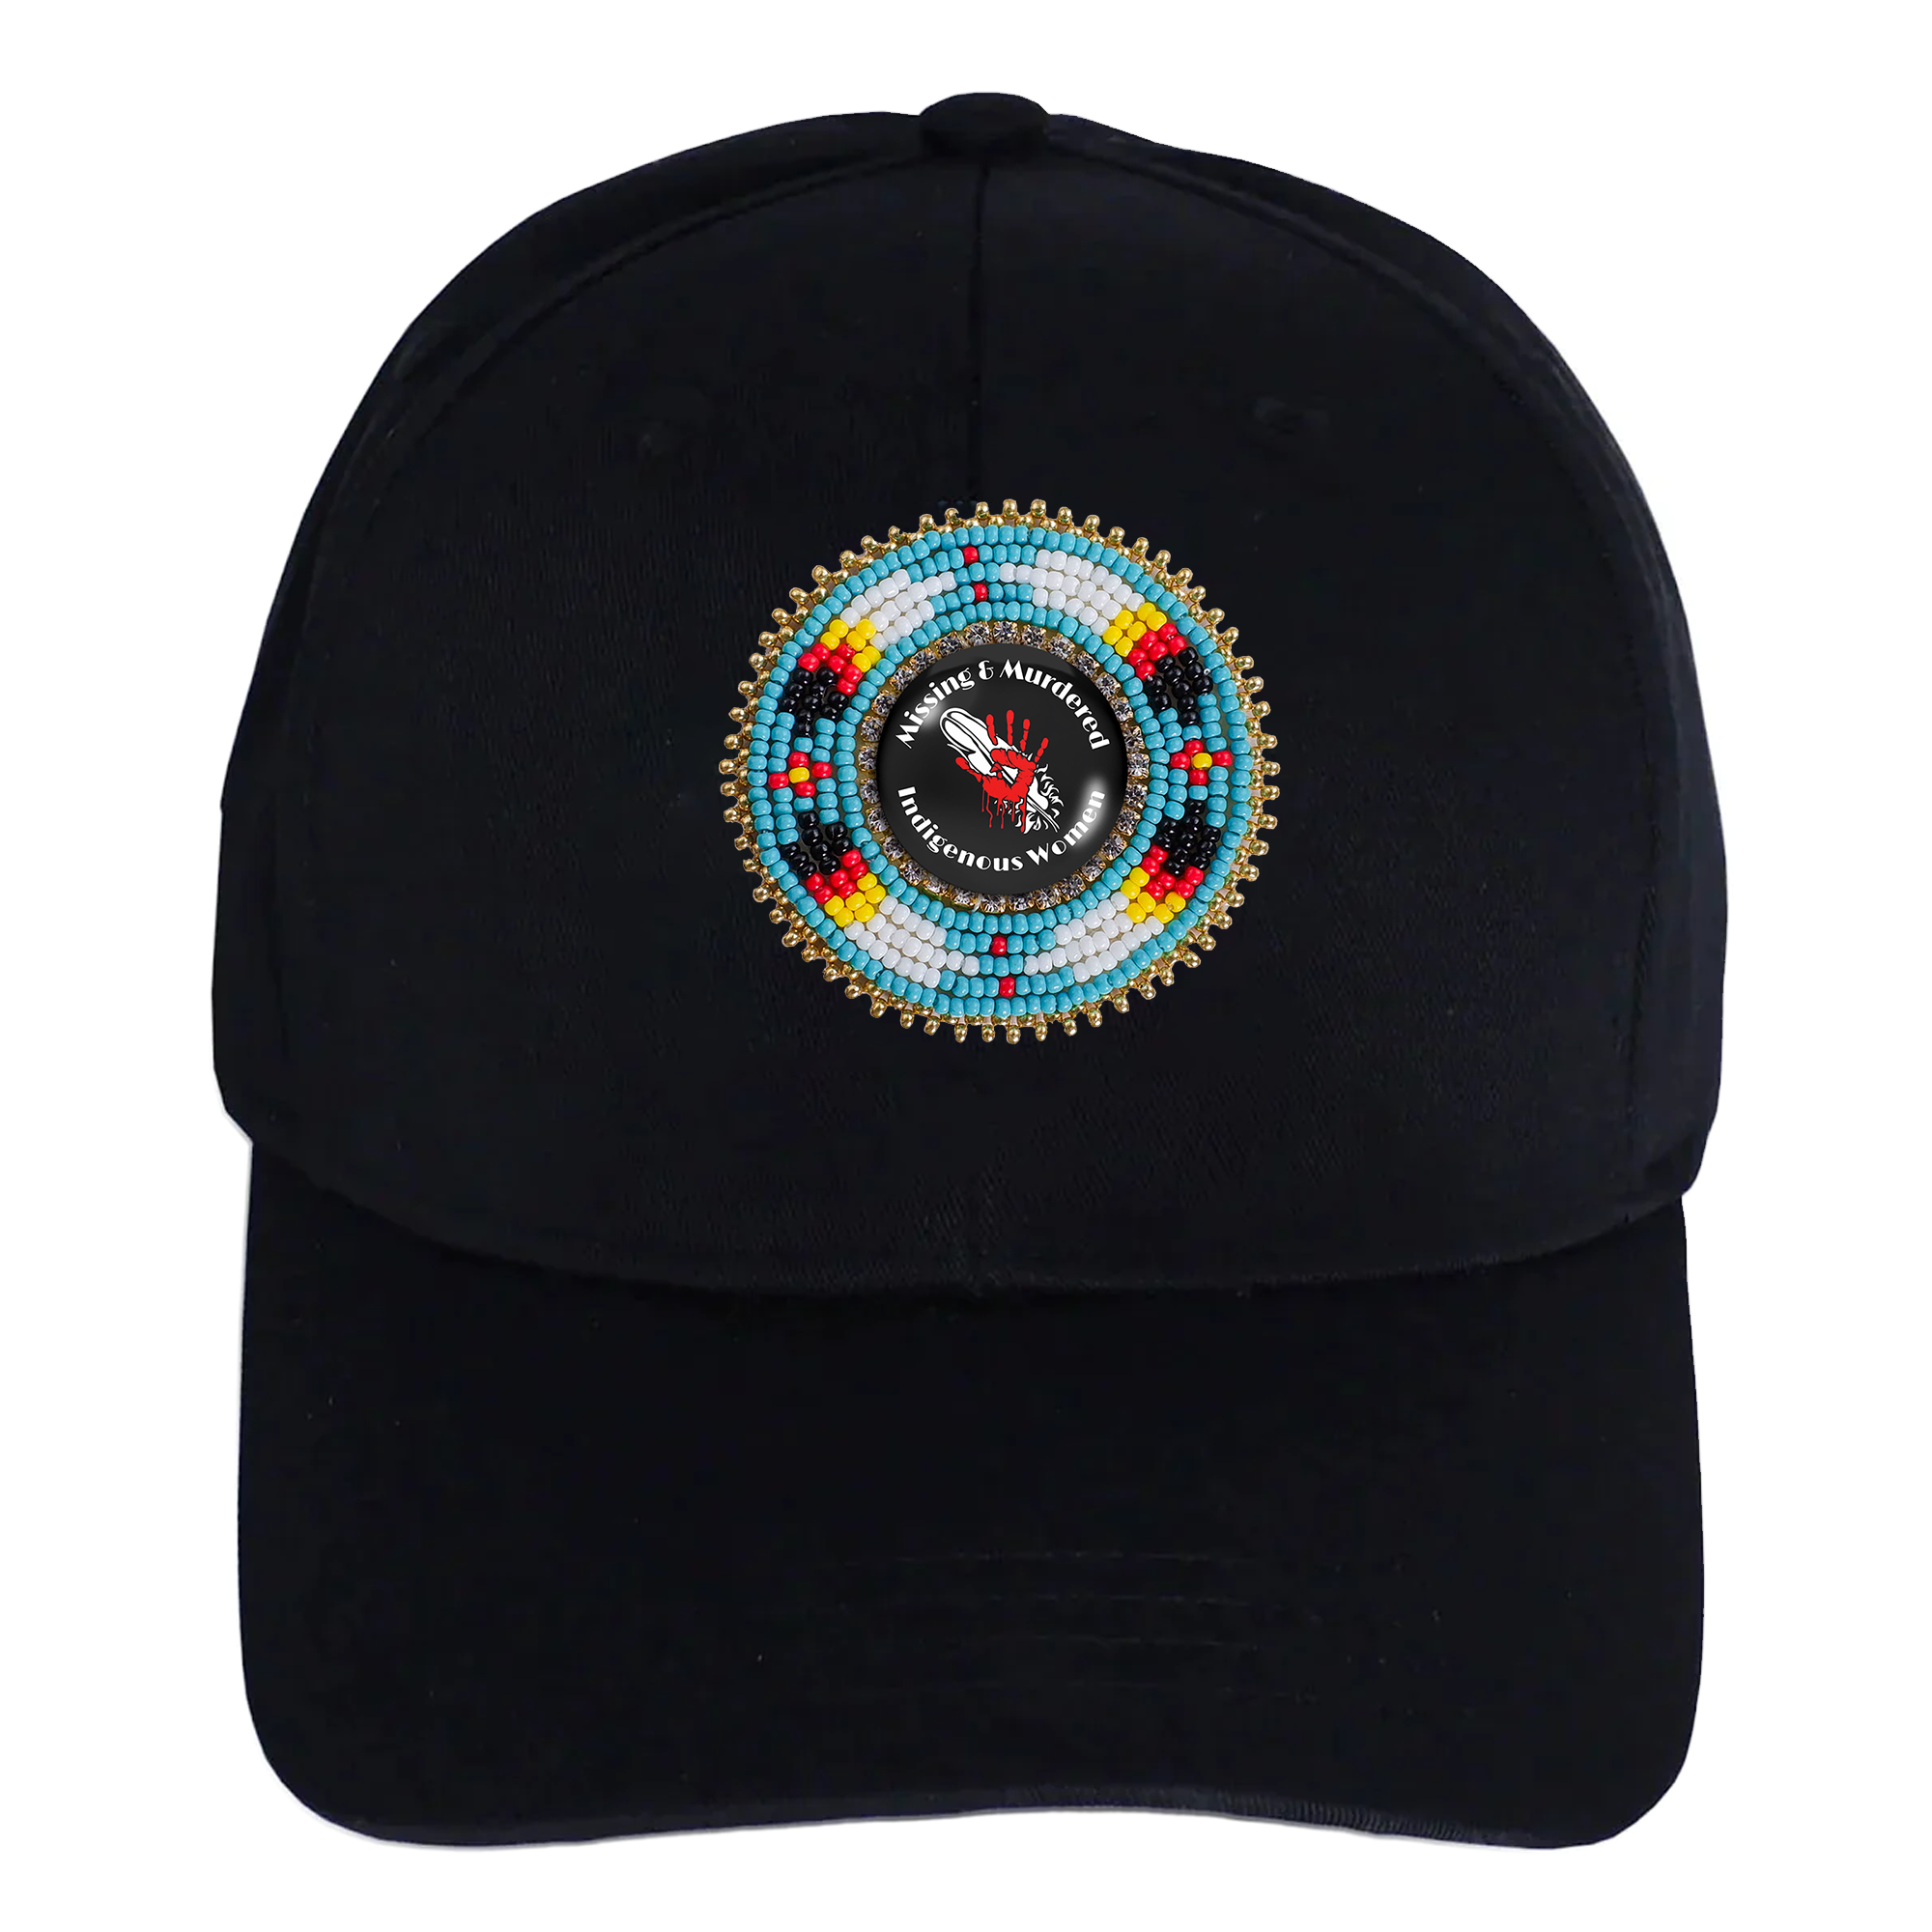 Feathers Red Hand Baseball Cap With Beaded Patch Cotton Unisex Native American Style